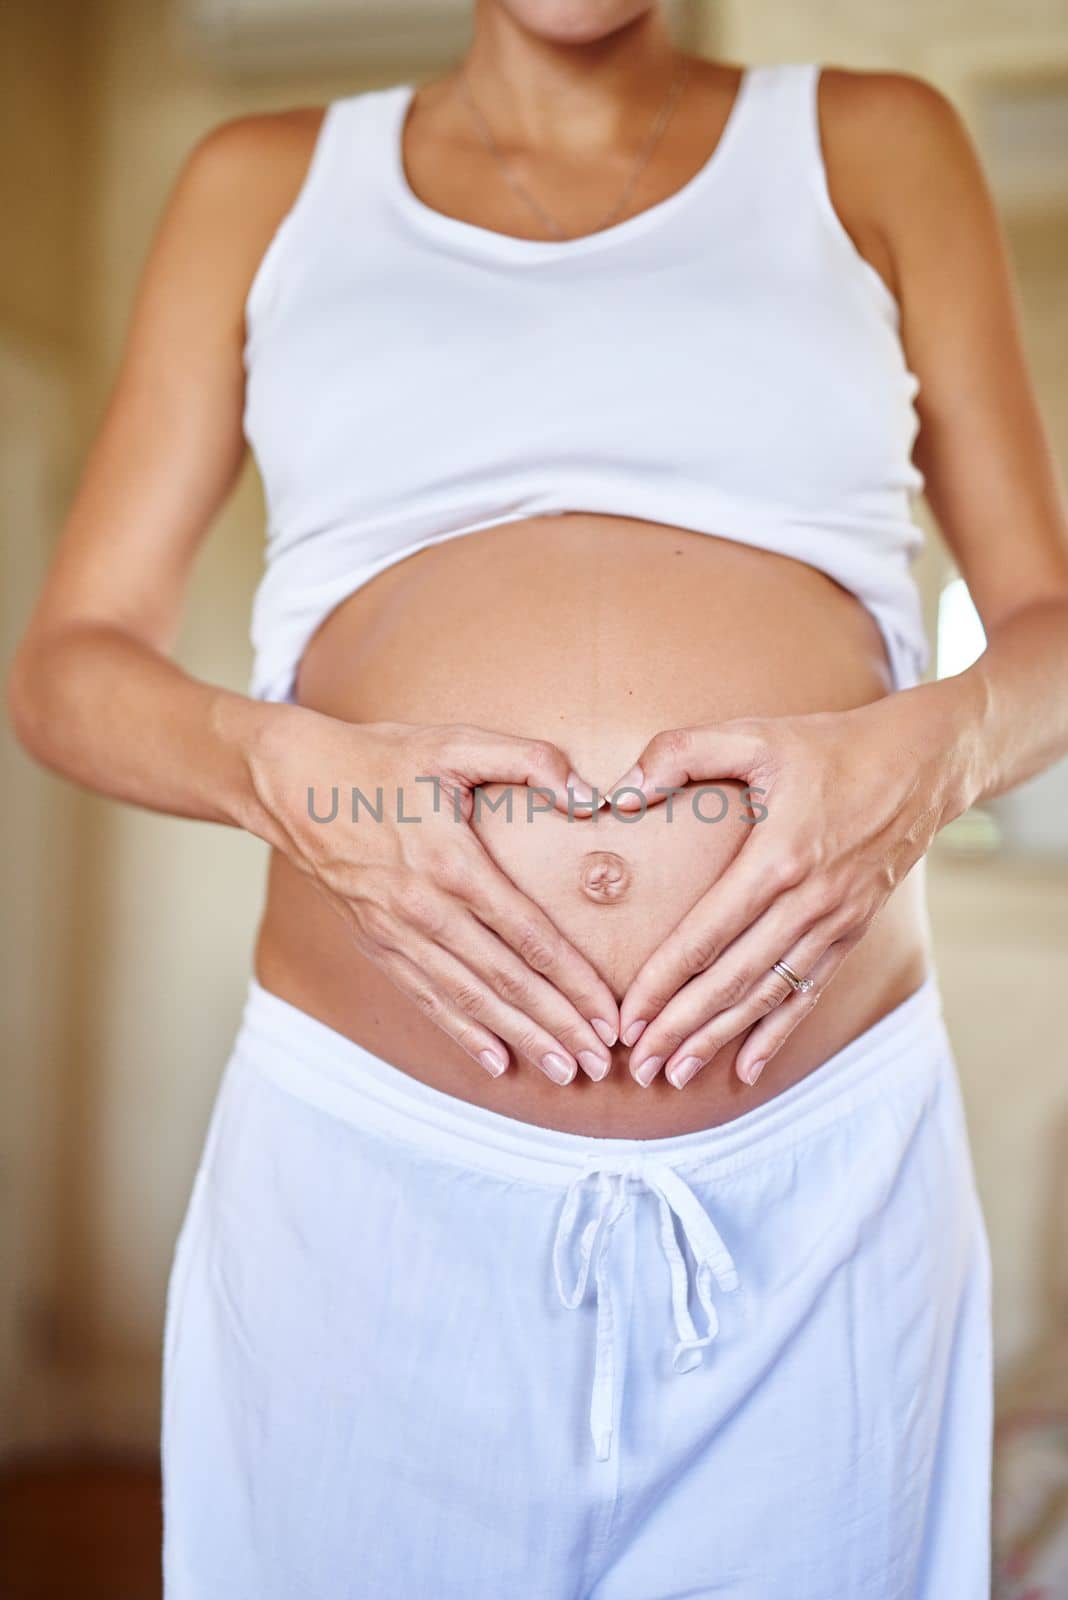 Unconditional love. a pregnant woman holding her belly with her hands forming a heart shape. by YuriArcurs